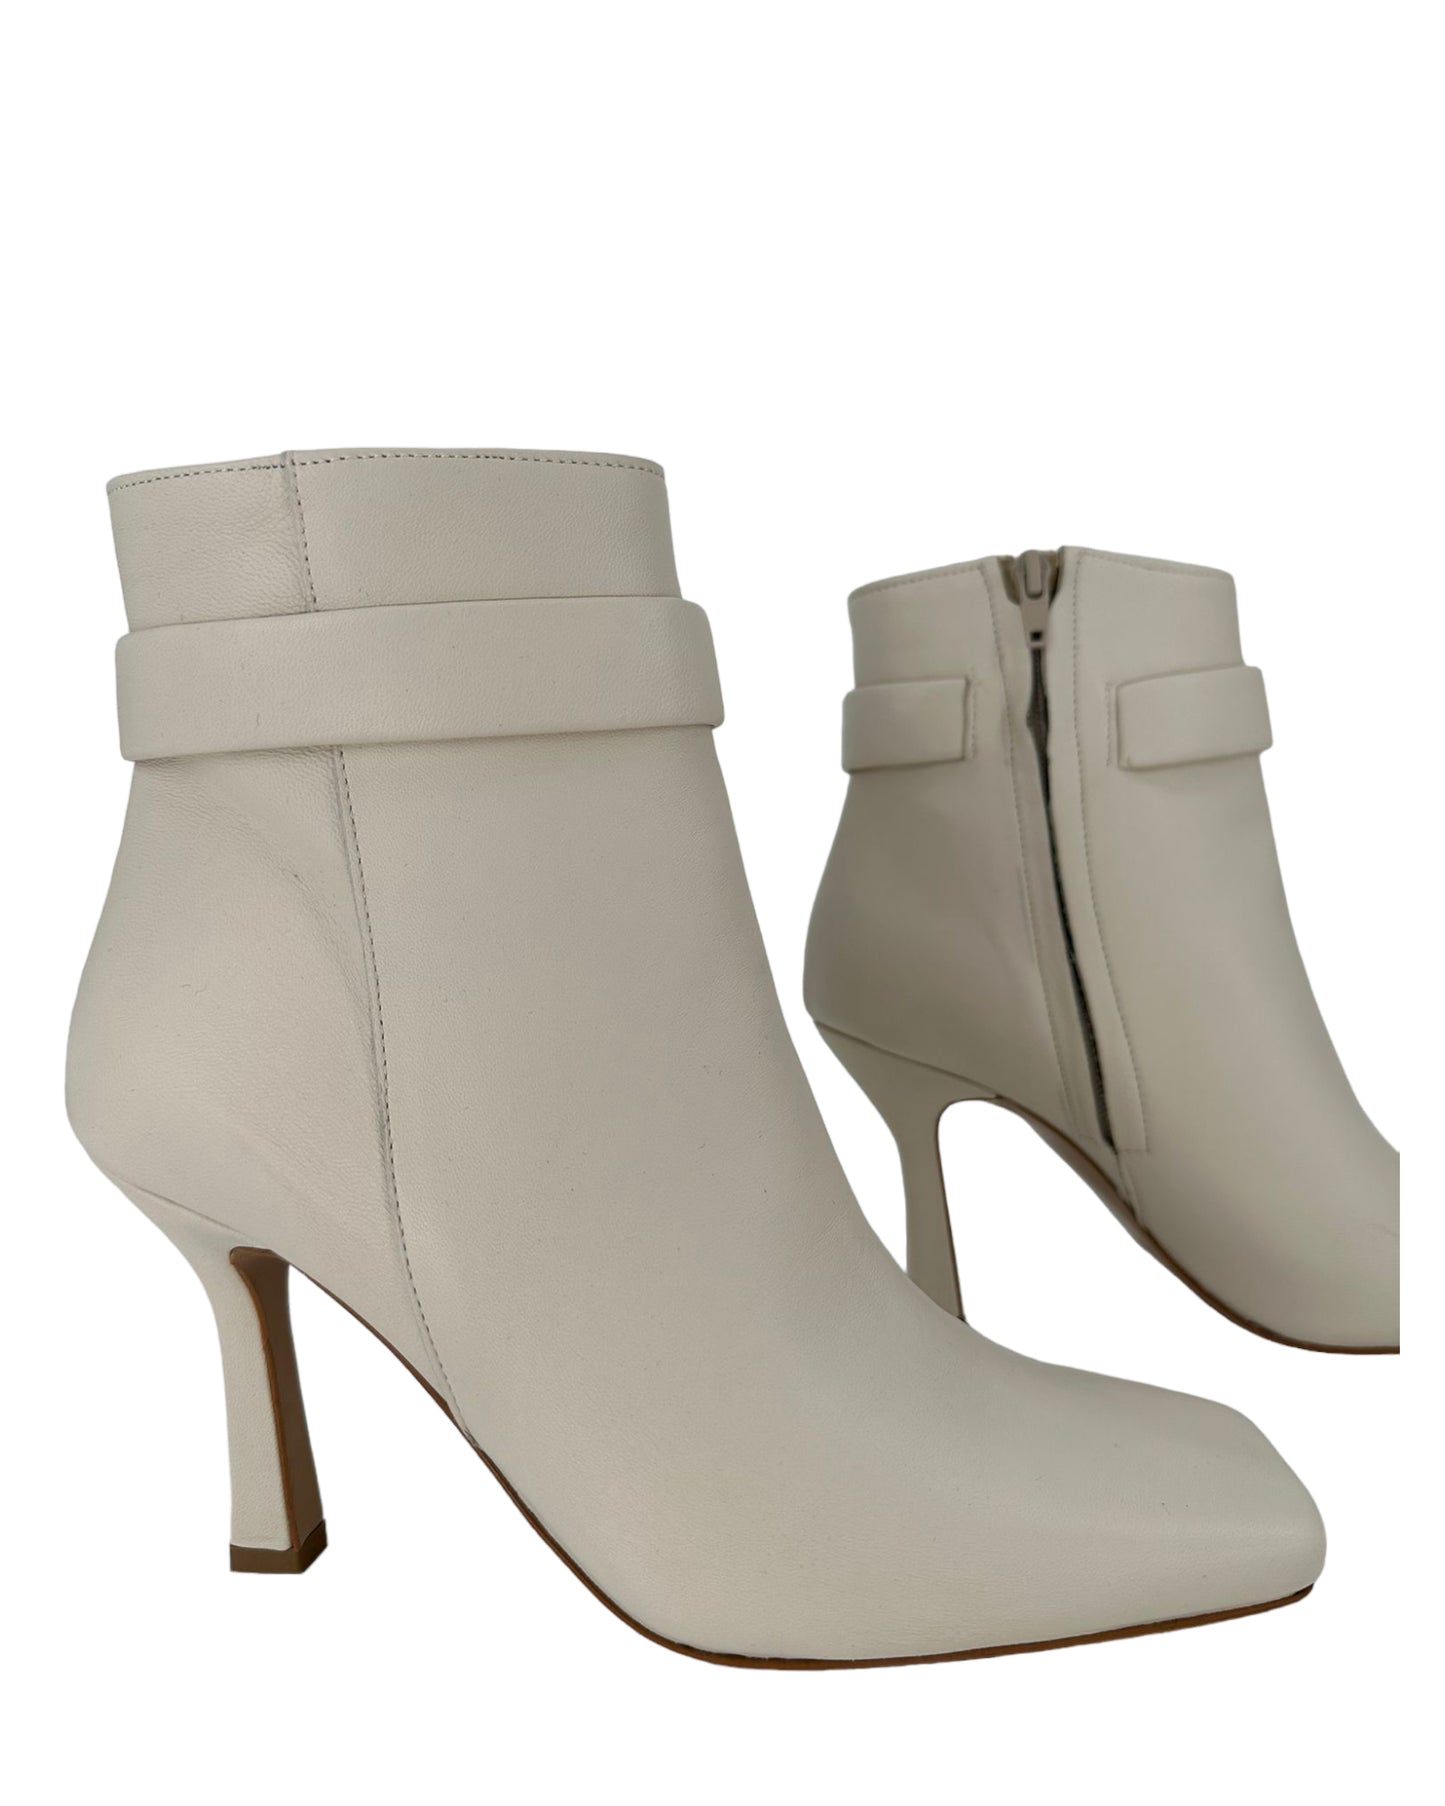 Milly Ivory leather ankle boots